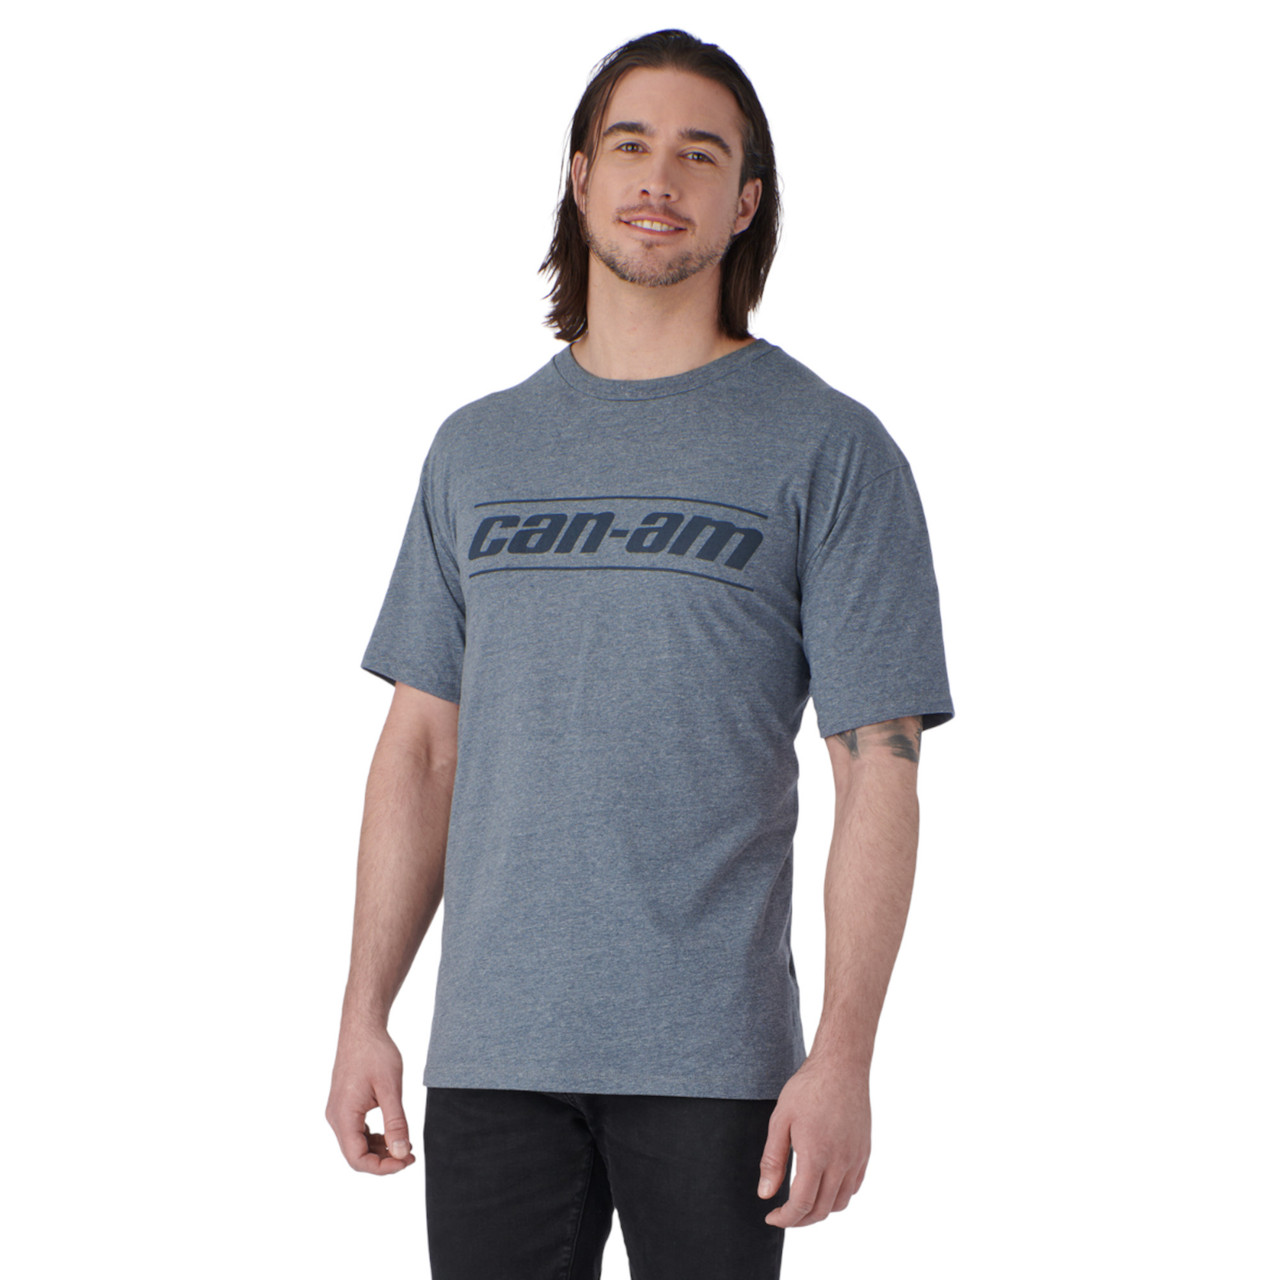 Can-Am New OEM, Men's Large Cotton Signature Branded T-Shirt, 4547540929